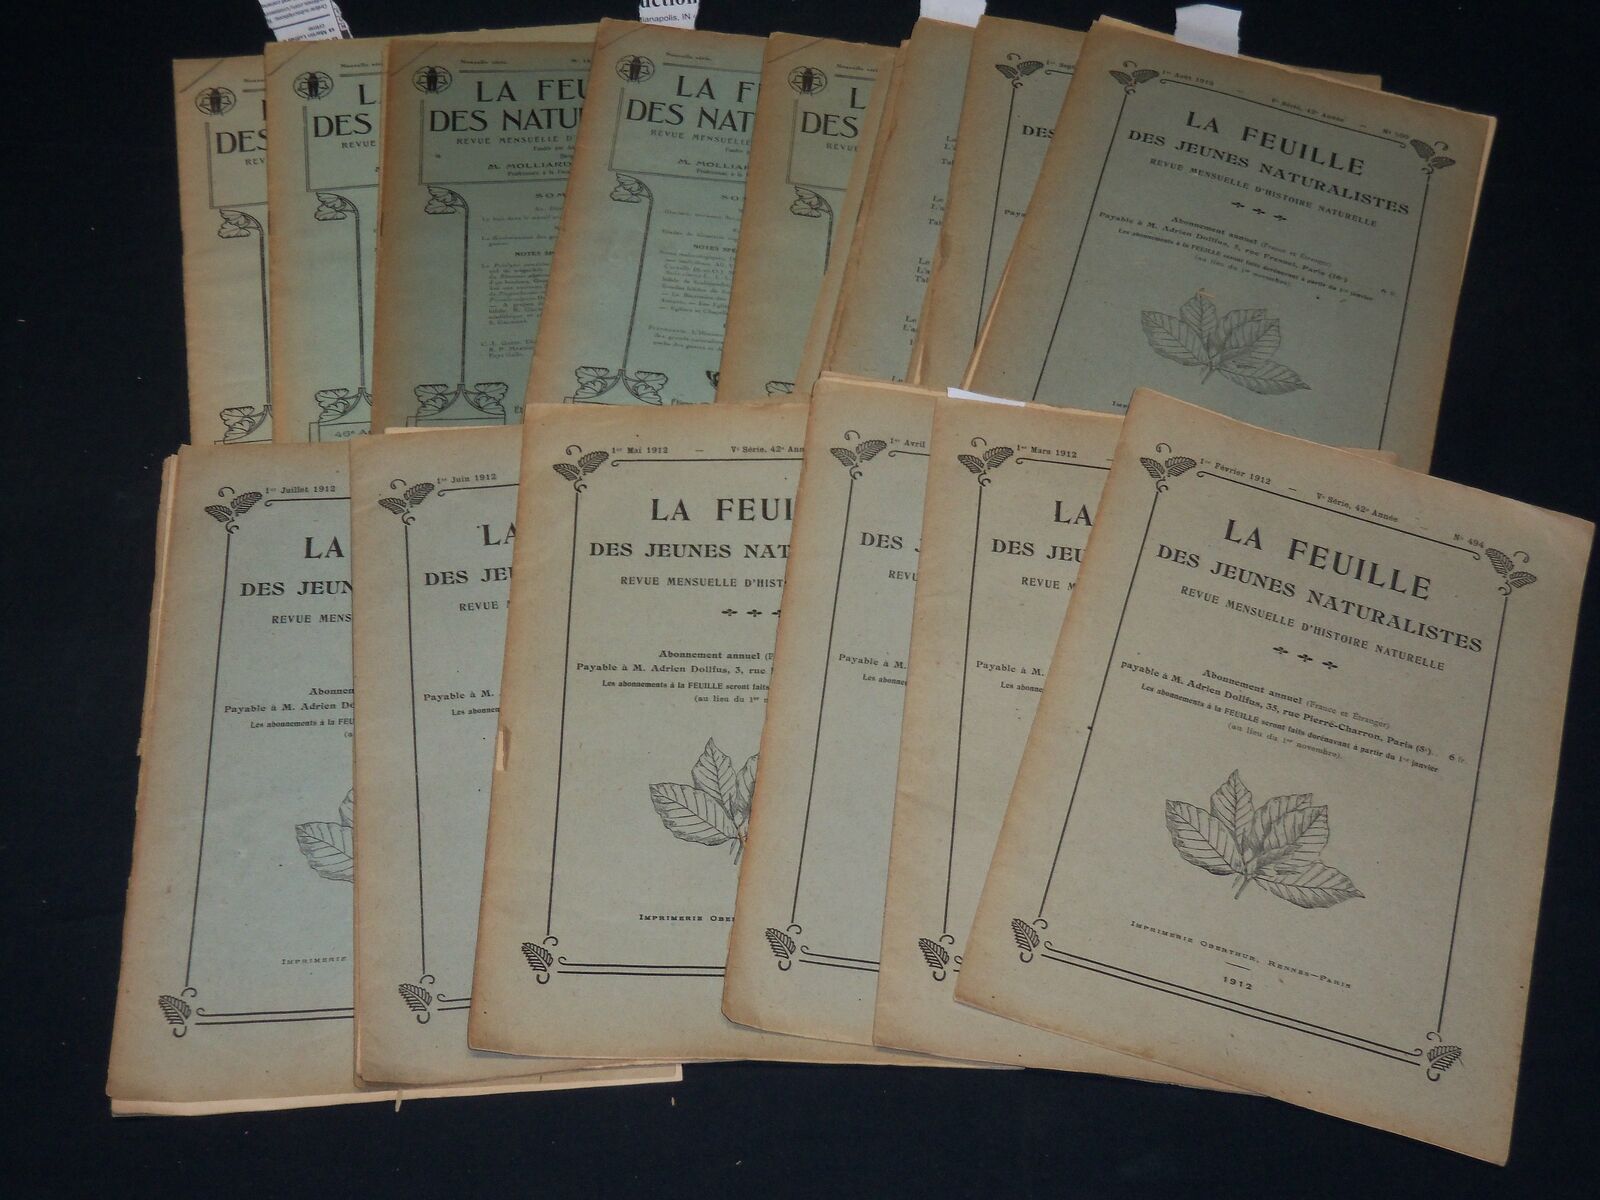 1912-1925 LA FEUILLE DES NATURALISTES FRENCH MAGAZINE LOT OF 22 ISSUES - WR 106C